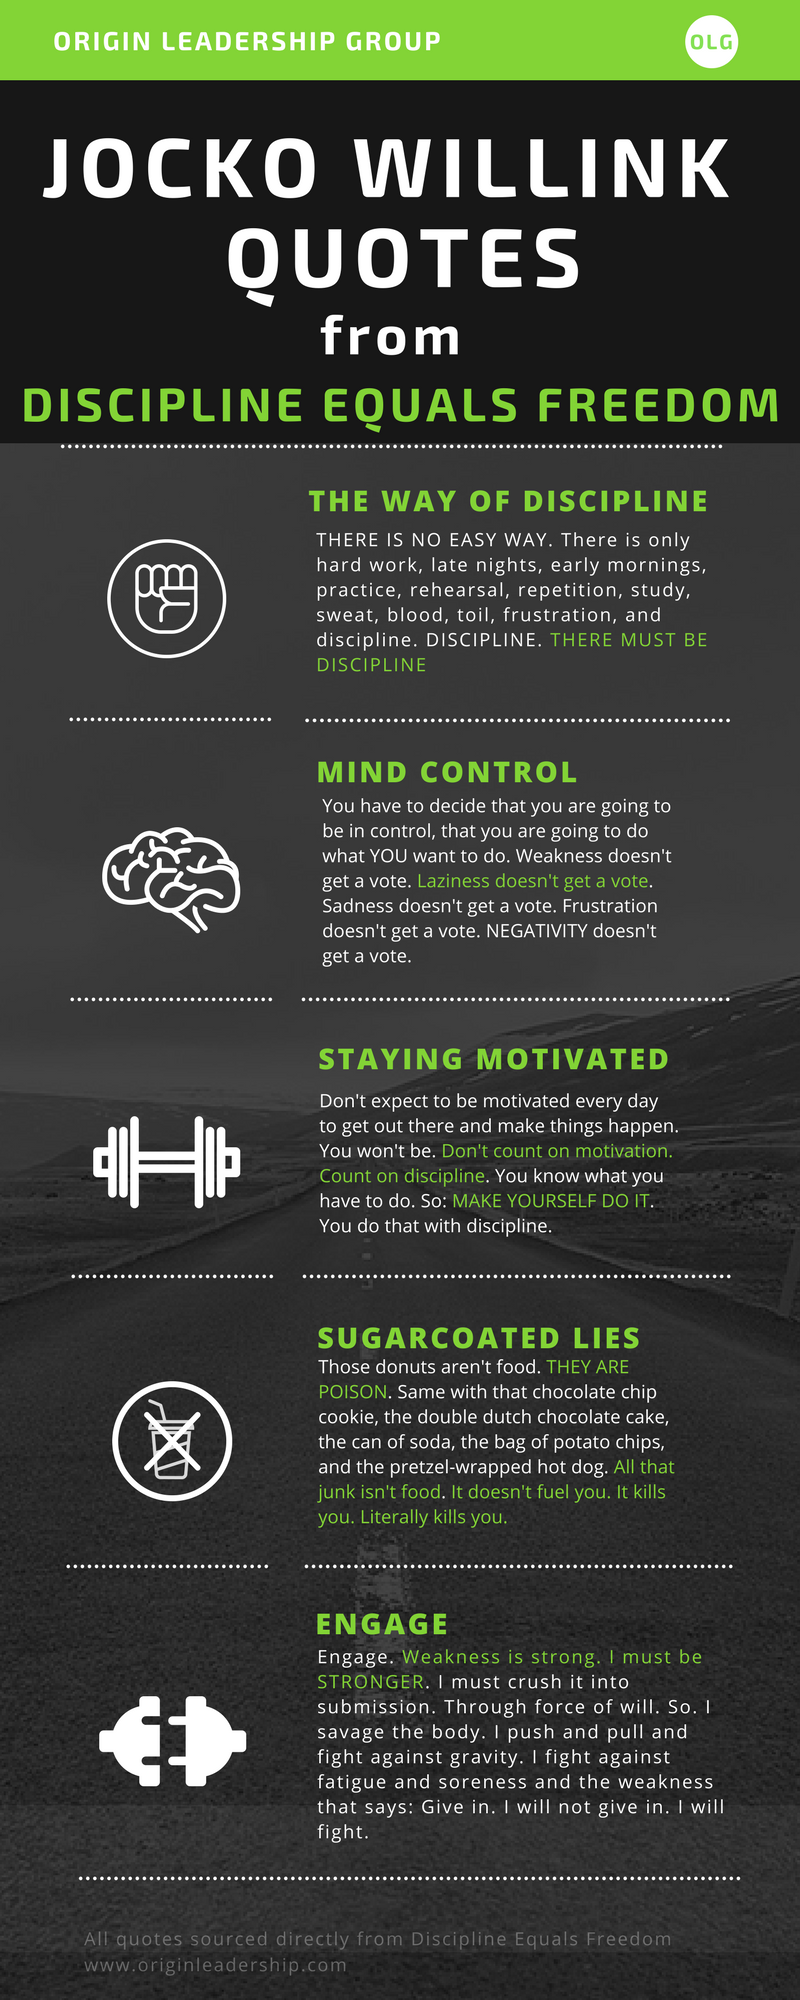 31 Phenomenal Jocko Willink Quotes from Discipline Equals Freedom. Get [Infographic] #infographic